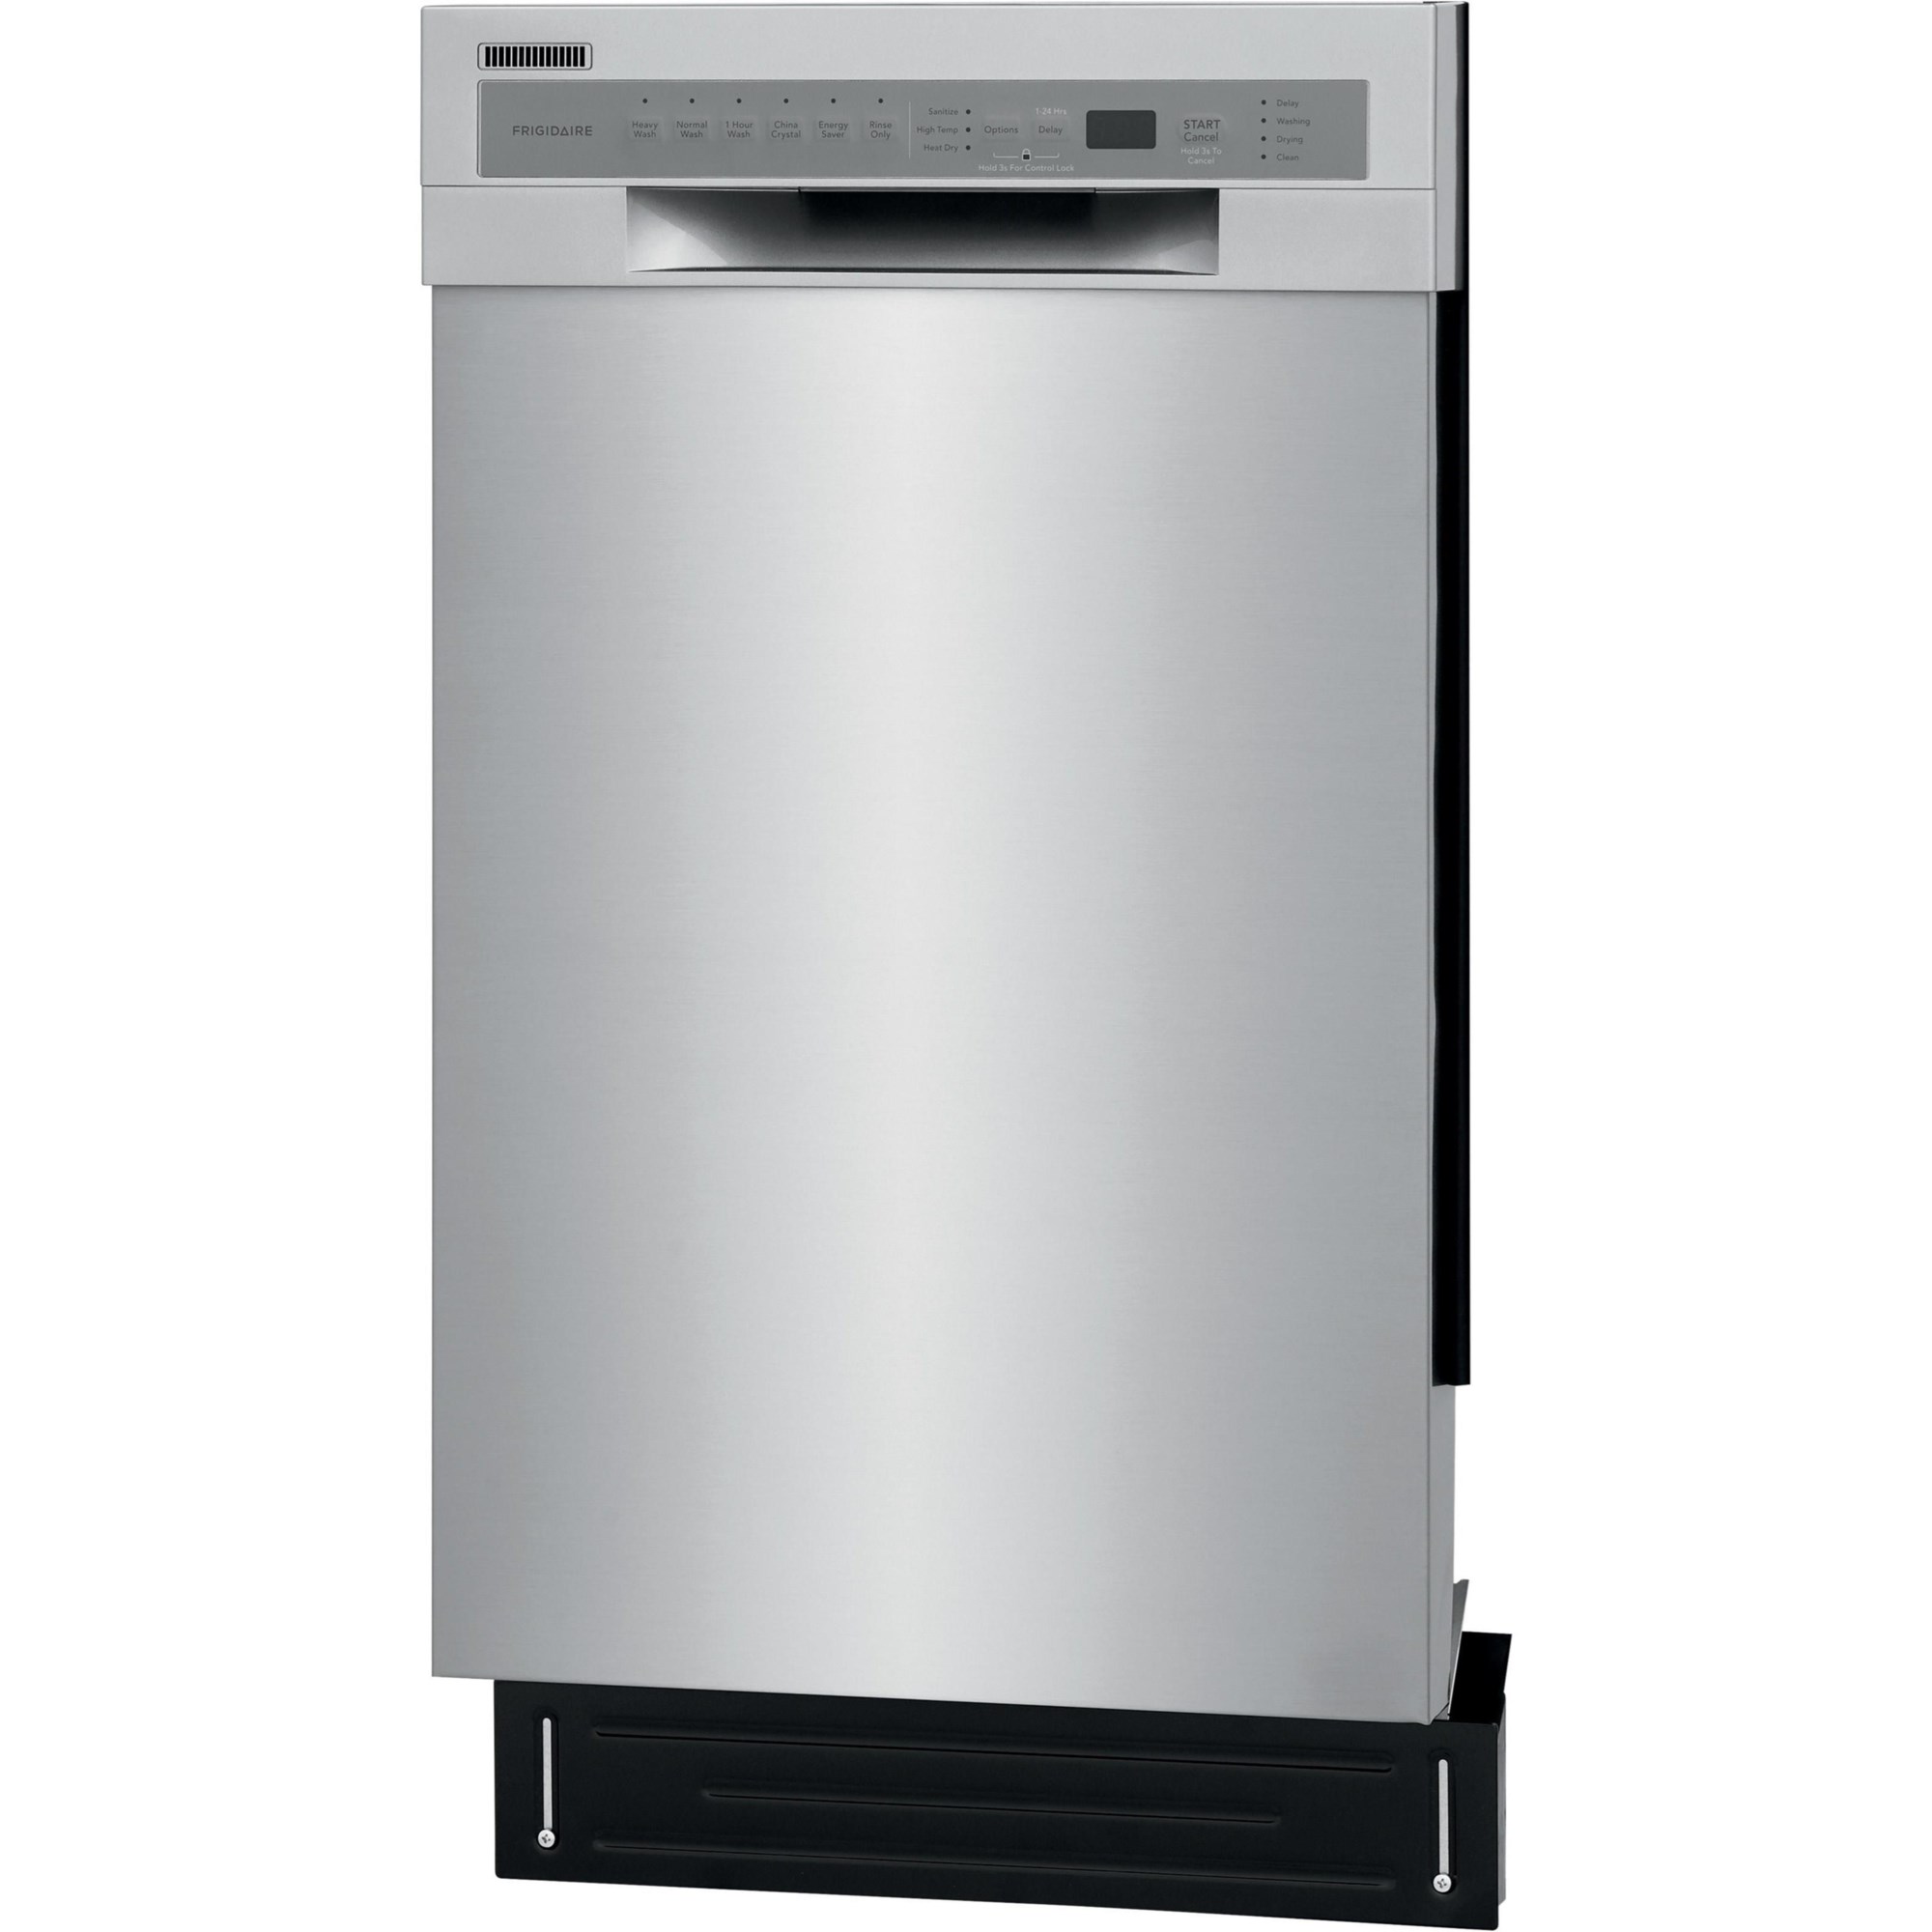 White Frigidaire 18 Compact Front Control Dishwasher with Dual Spray Arms